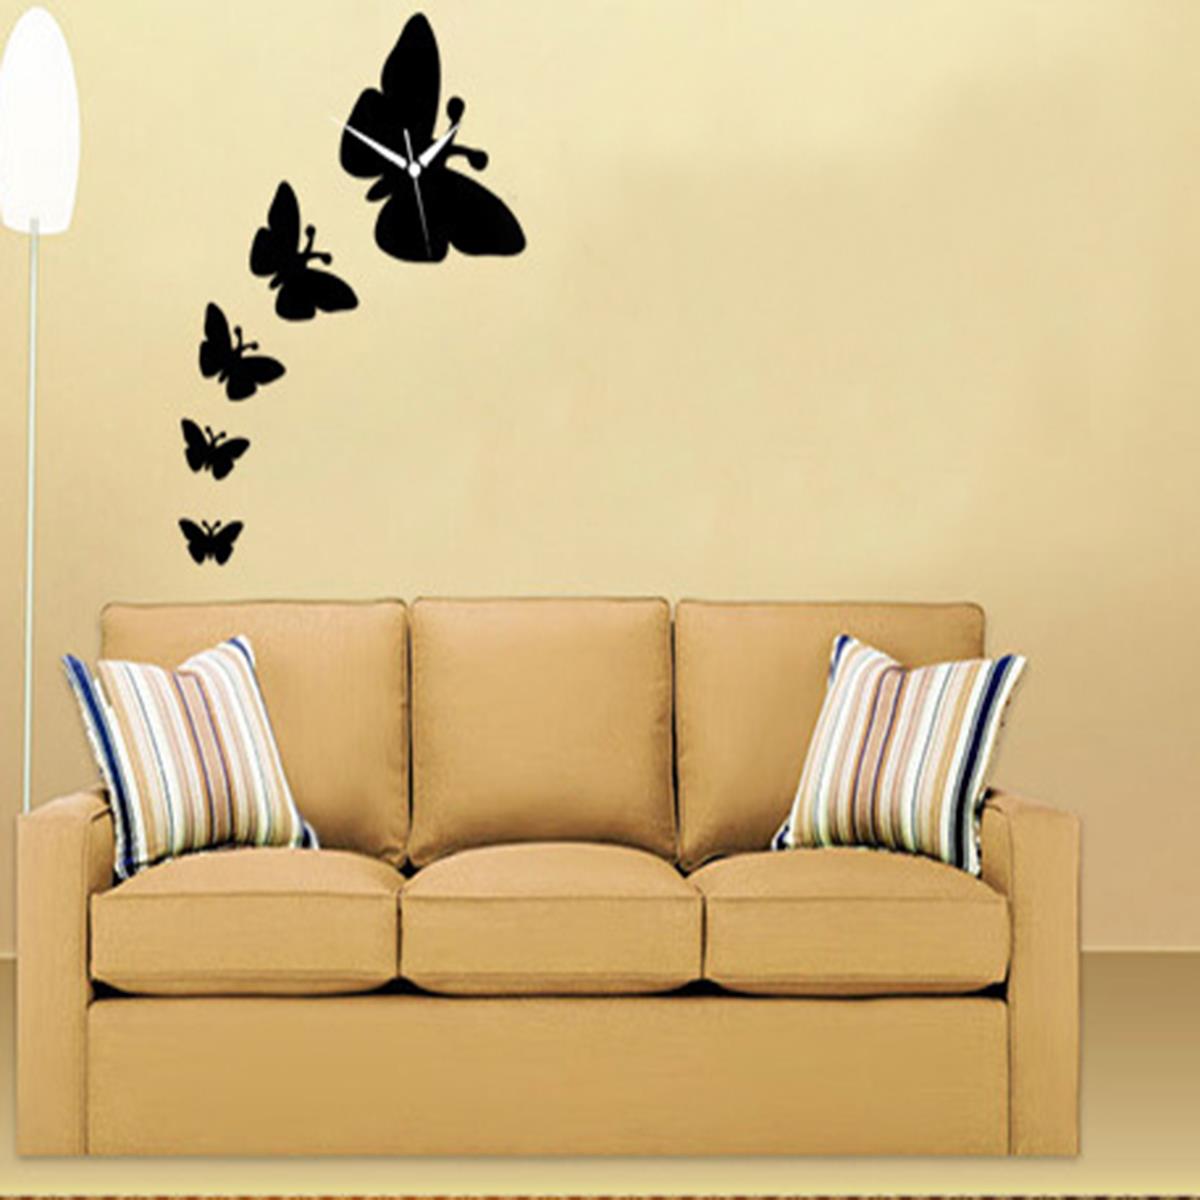 Butterfly-Wall-Clock-Sticker-Specular-Surface-Wall-Sticker-Home-Decoration-1082153-9